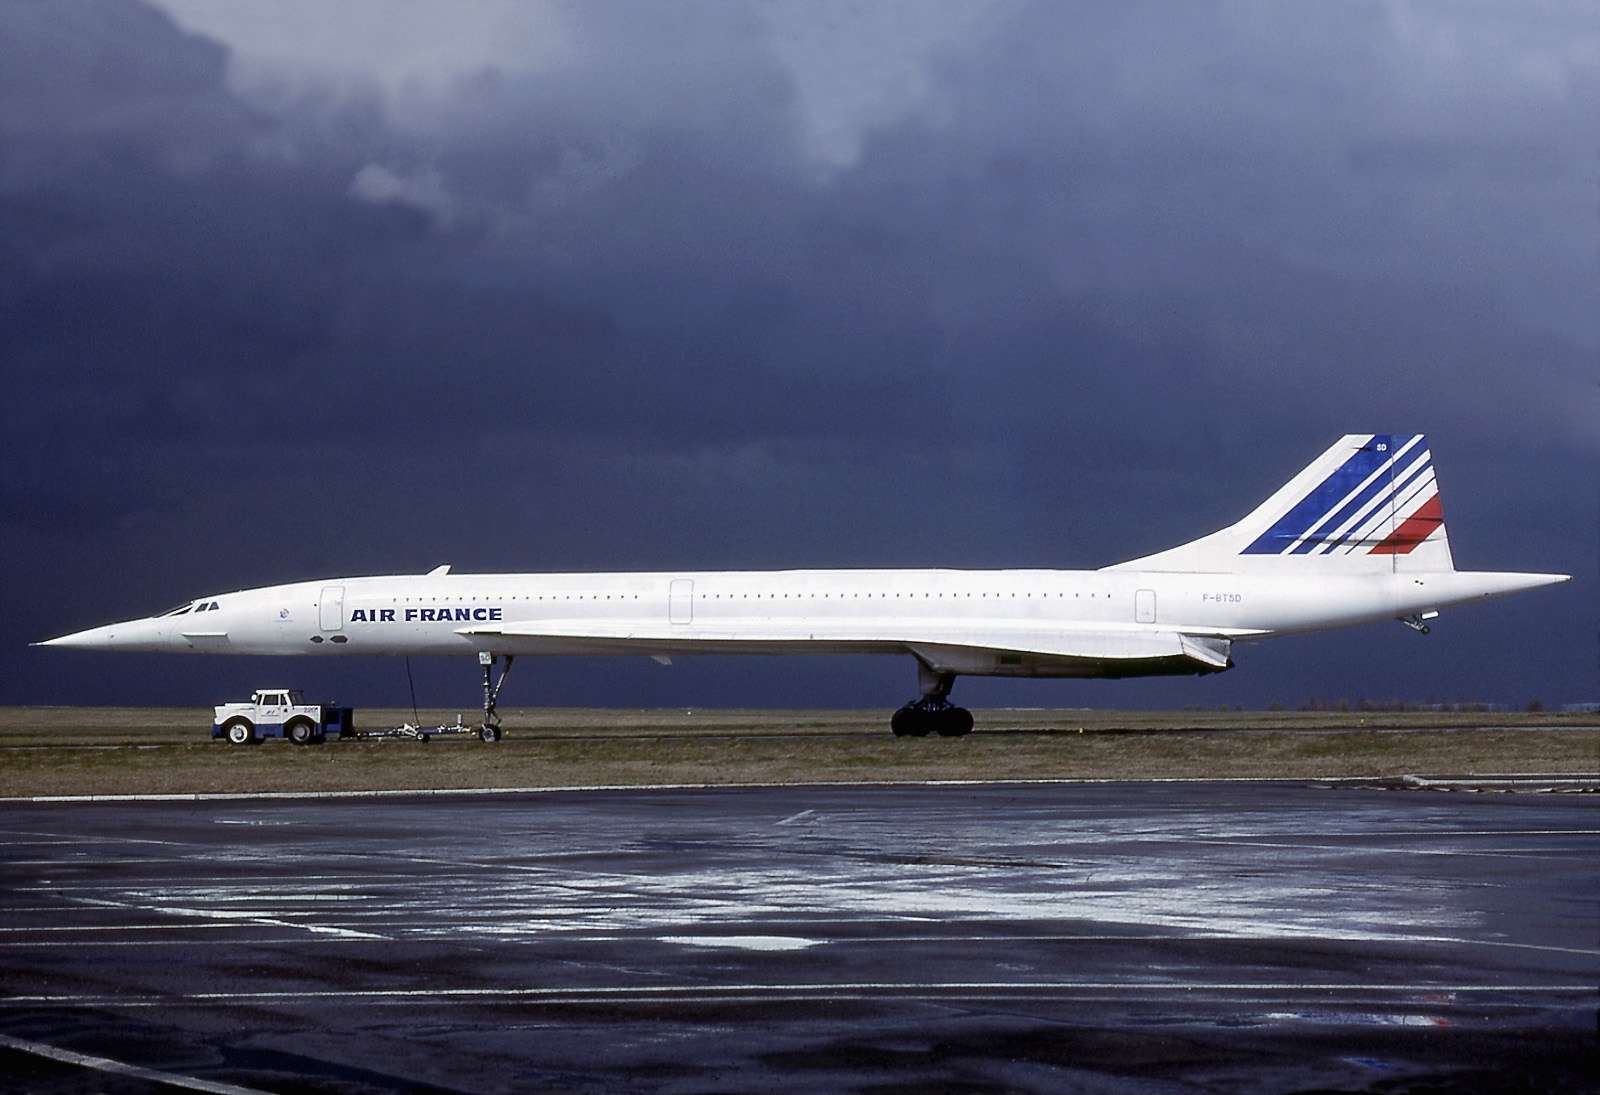 What Routes Did Air France Operate Using Concorde?